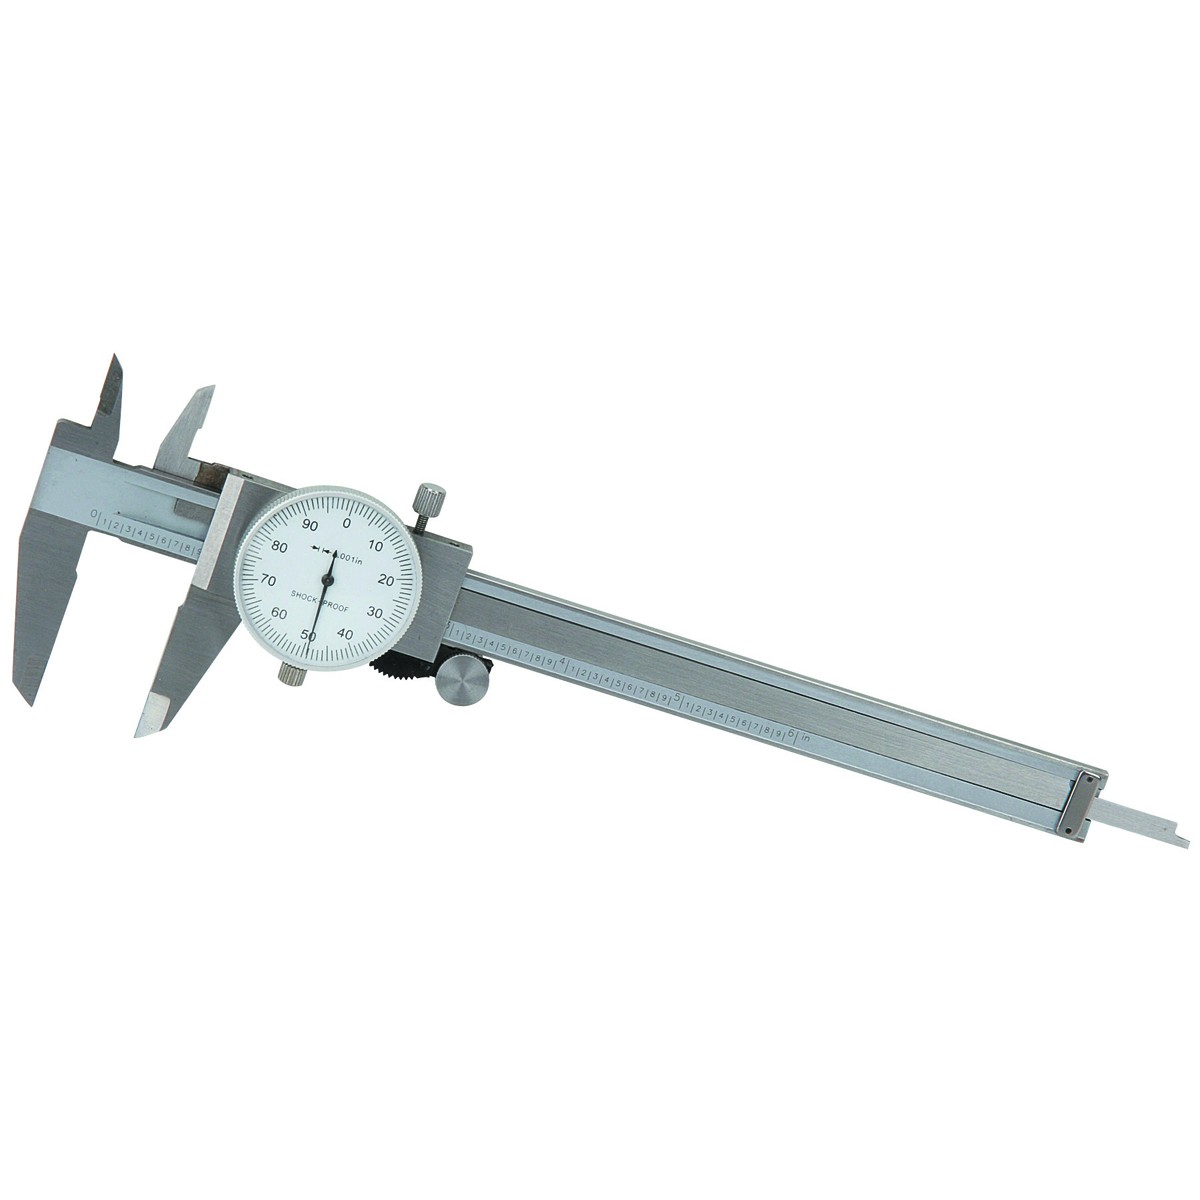 12" Precision Stainless Steel DIAL Caliper White face 